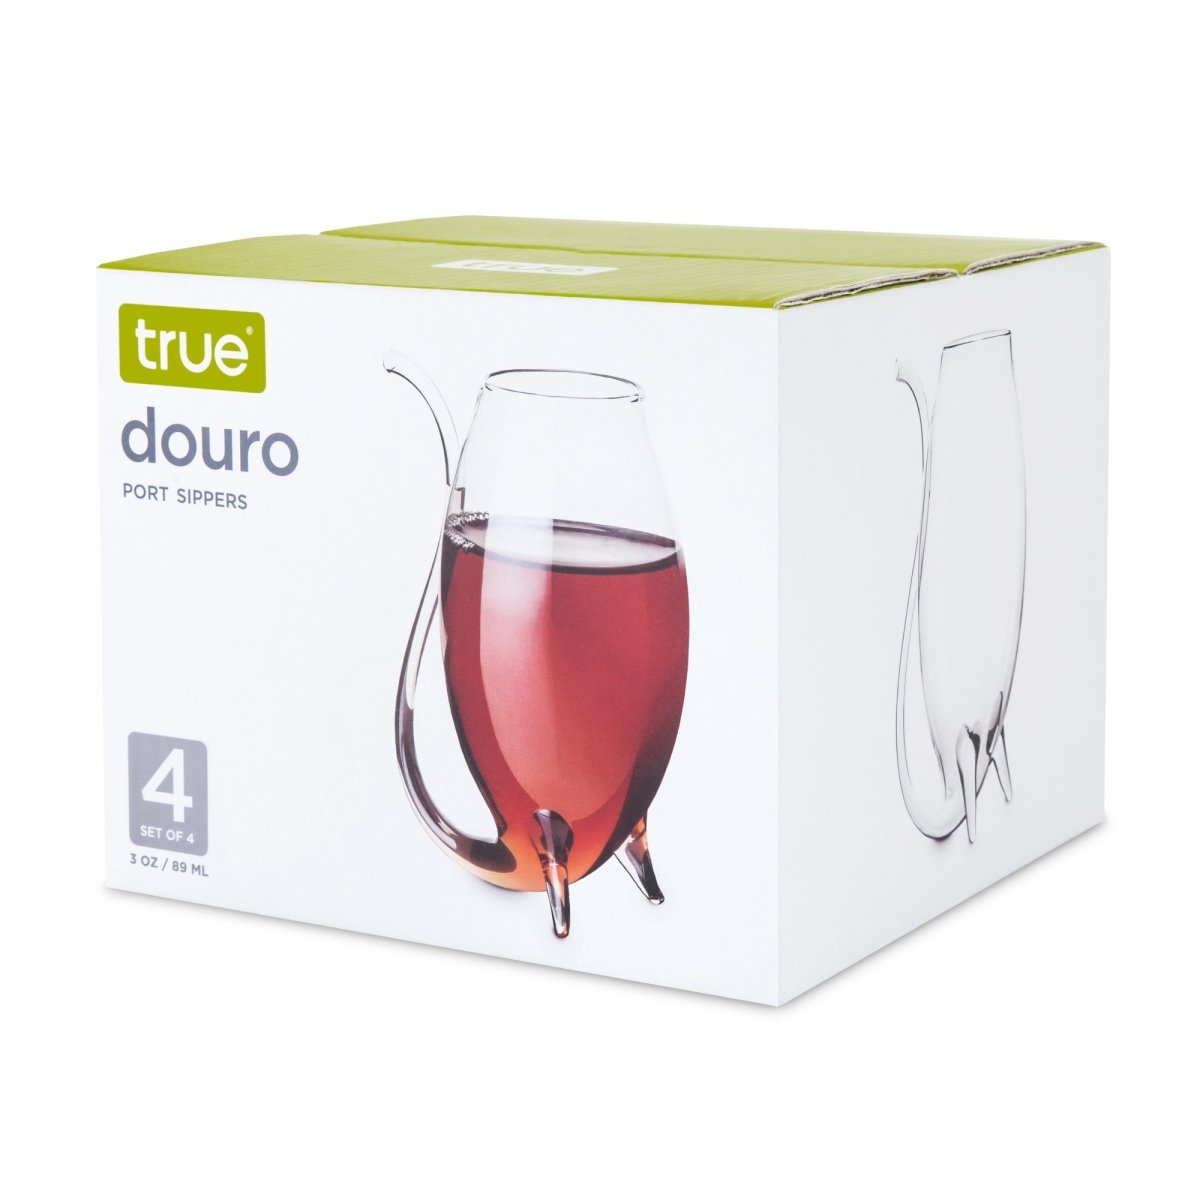 TRUE Douro 3oz Port Sippers, Set of 4 - lily & onyx